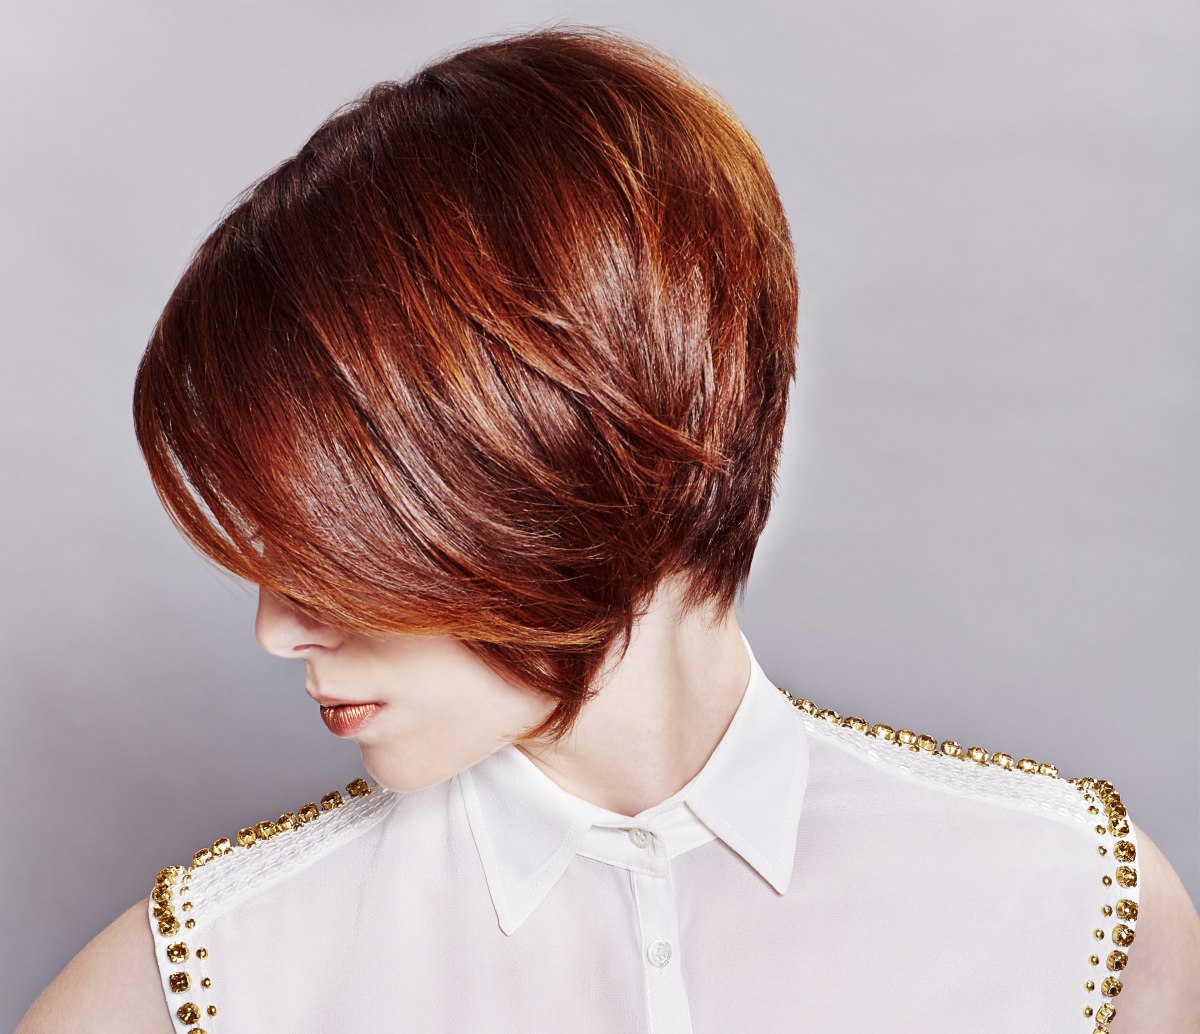 Classy short hairstyle with a round back and a dark red 